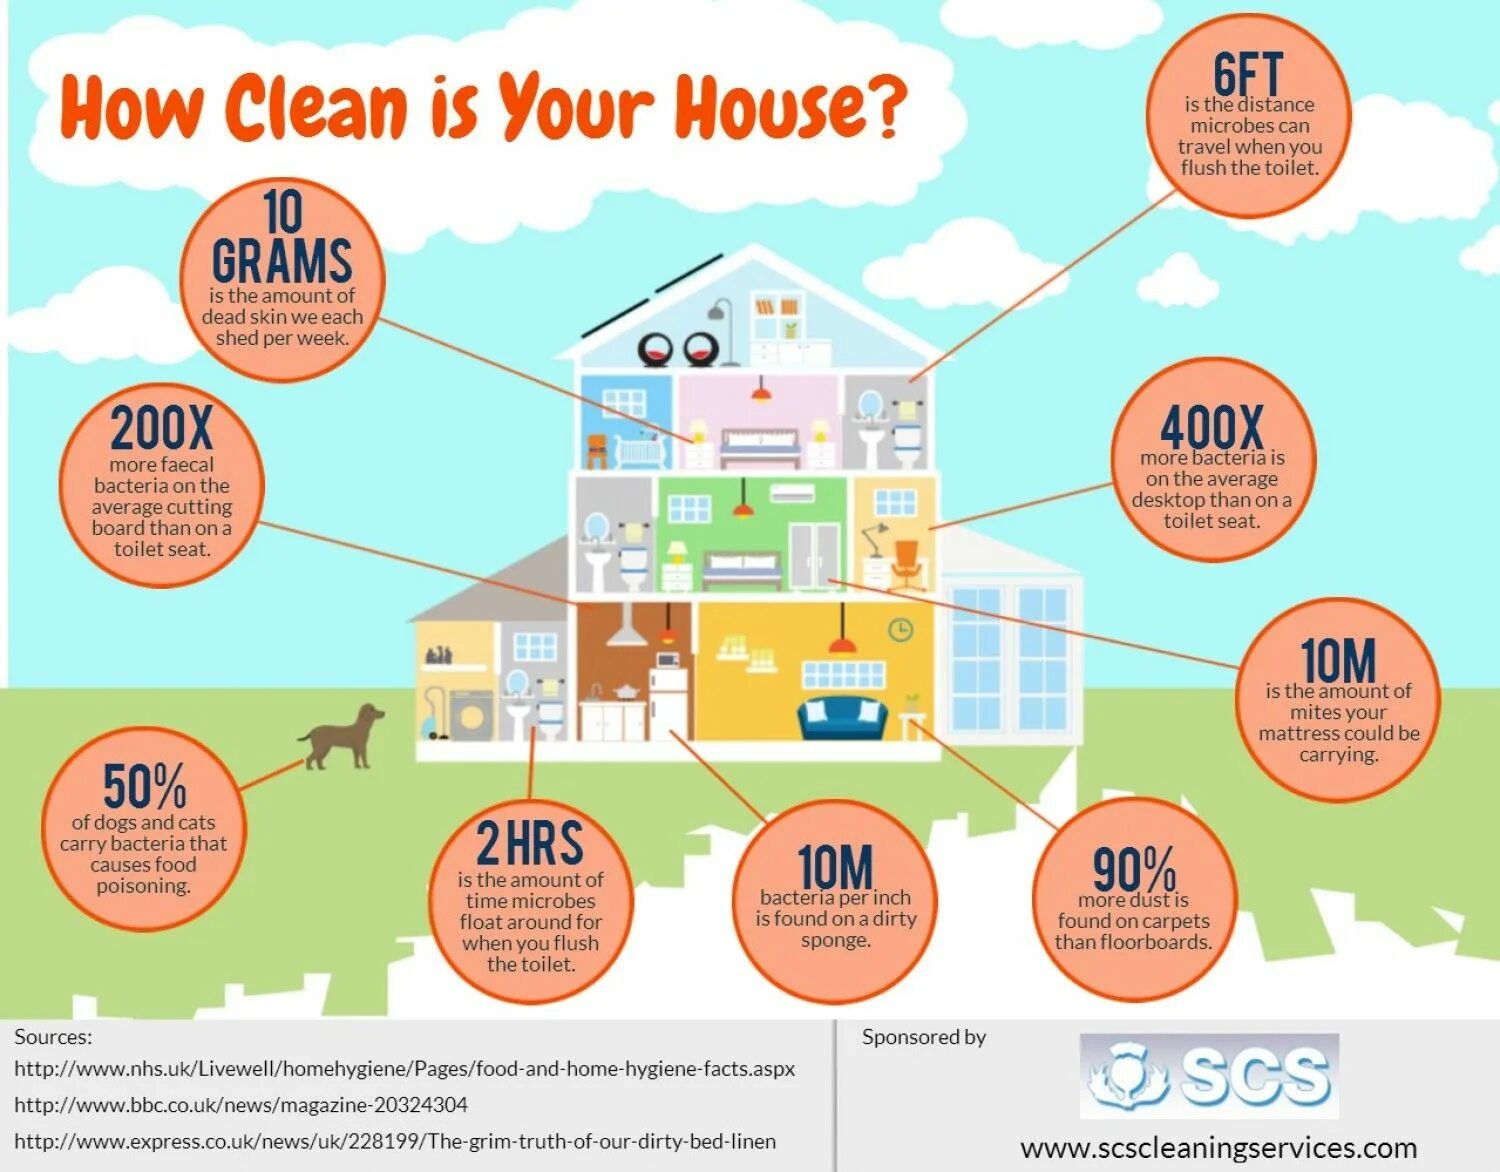 How clean is your House. Swed House инфографика. The House is clean. How to clean your House сщмшв.